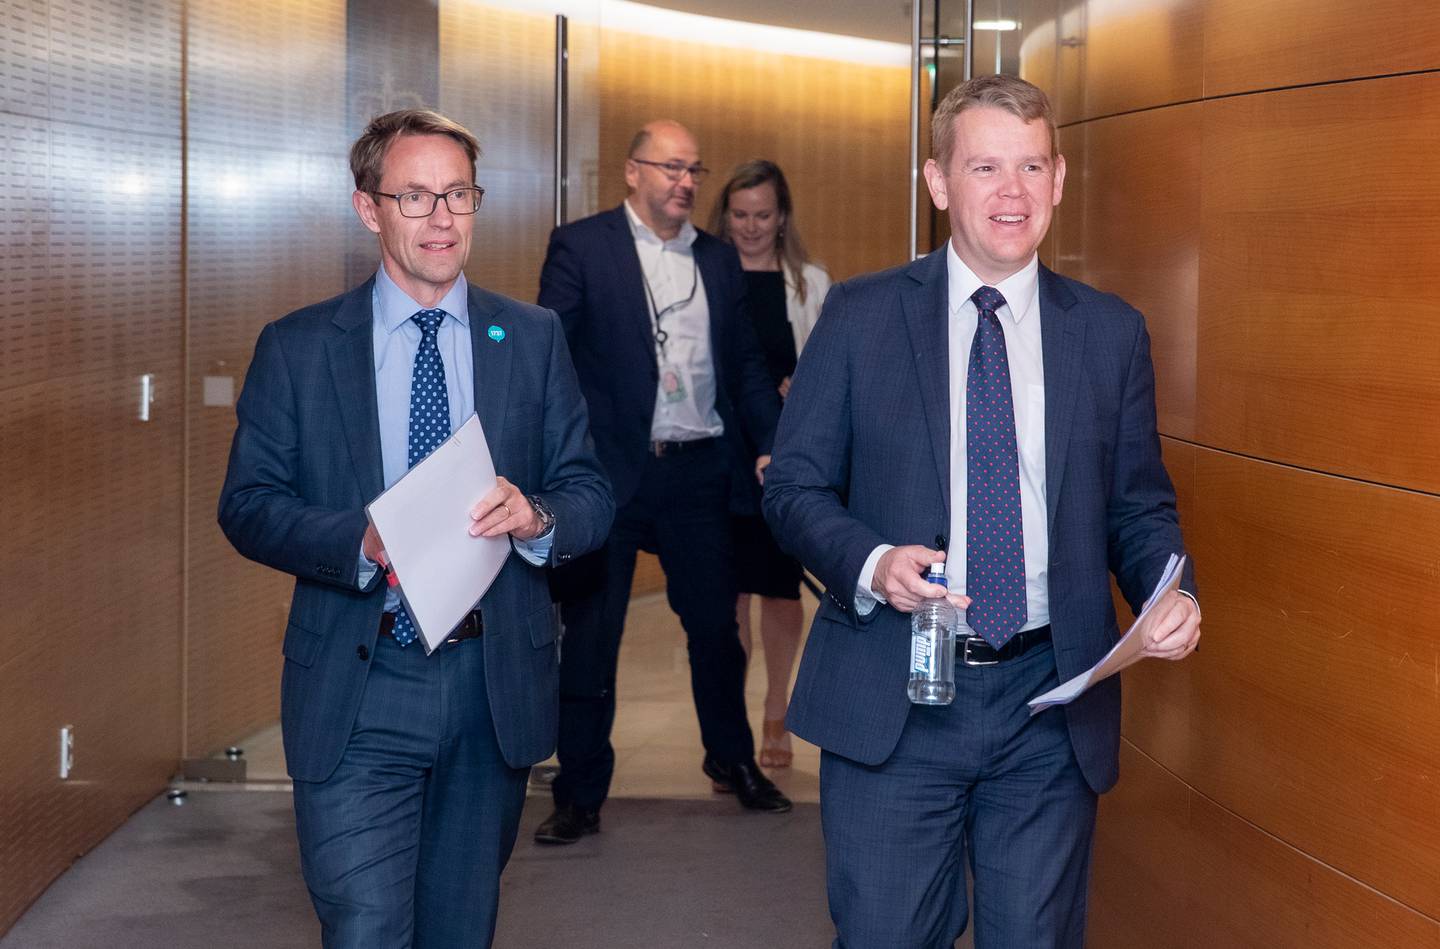 Director-general of health Dr Ashley Bloomfield and Covid Response Minister Chris Hipkins arrive for their Covid-19 summer resurgence response plan briefing last month. Photo / Mark Mitchell